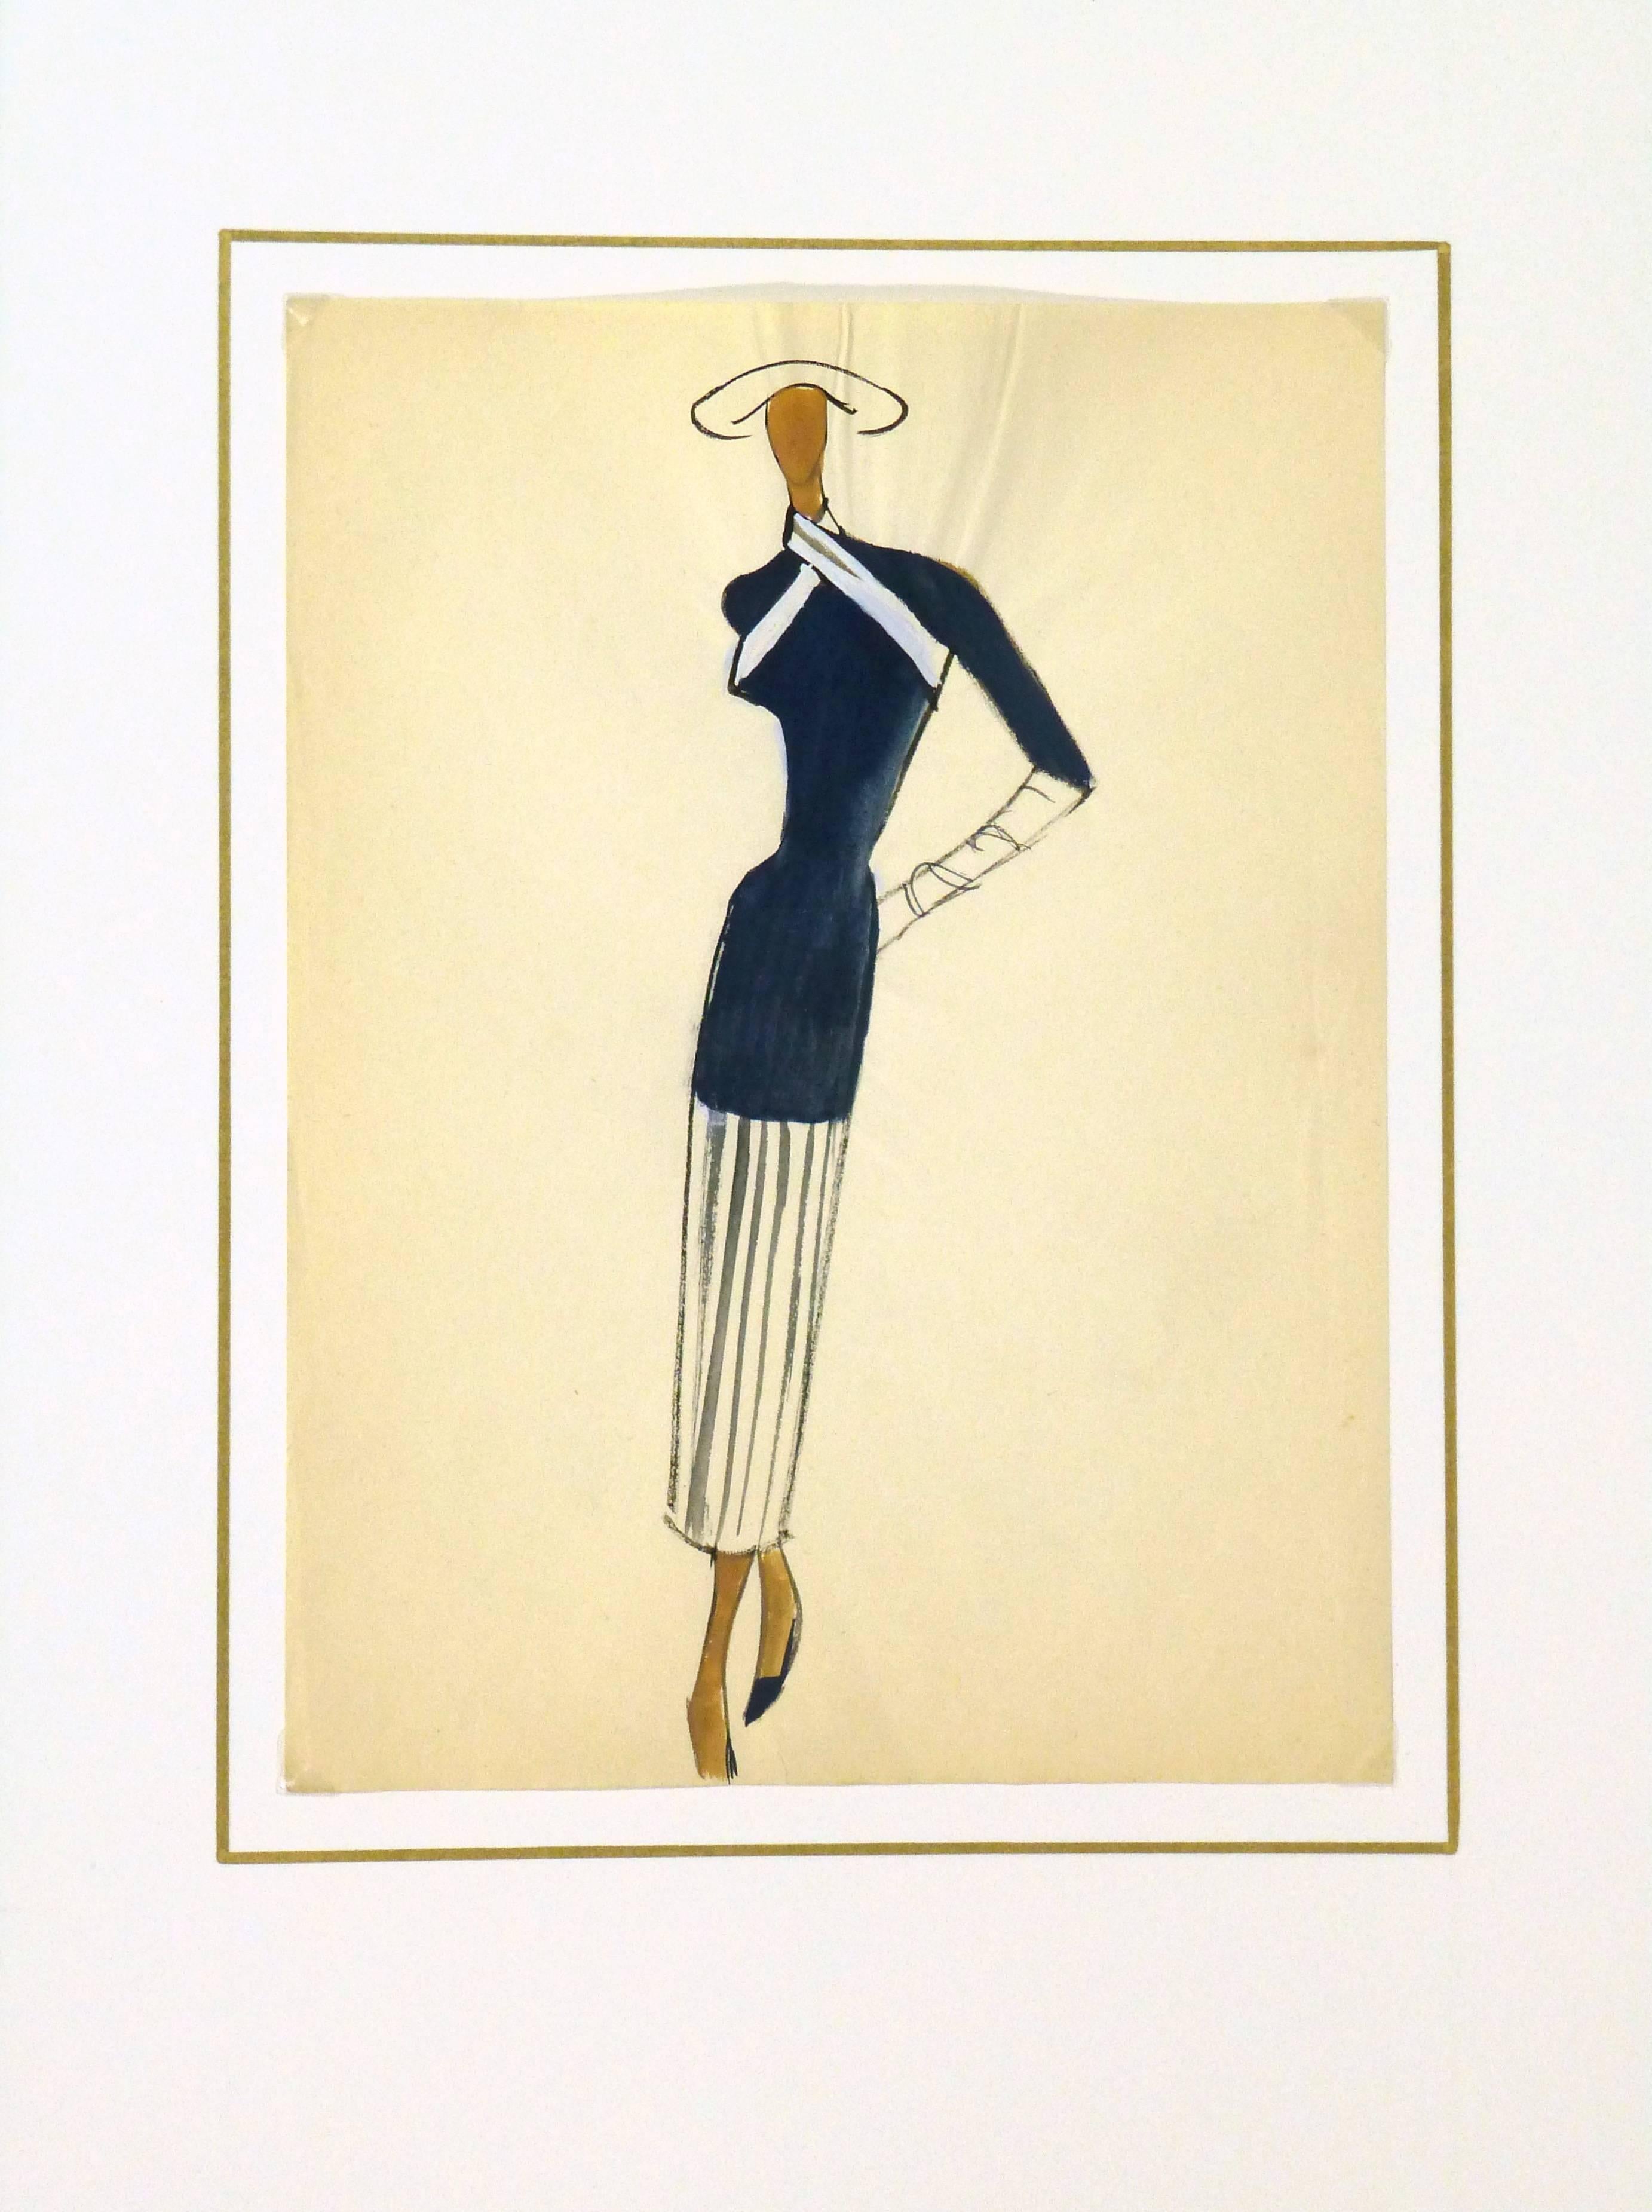 Vintage watercolor and ink fashion sketch of an elegant navy blue blouse paired with a slim skirt by the famed Balmain Fashion House, circa 1950. 

Original one-of-a-kind artwork on paper displayed on a white mat with a gold border. Mat fits a